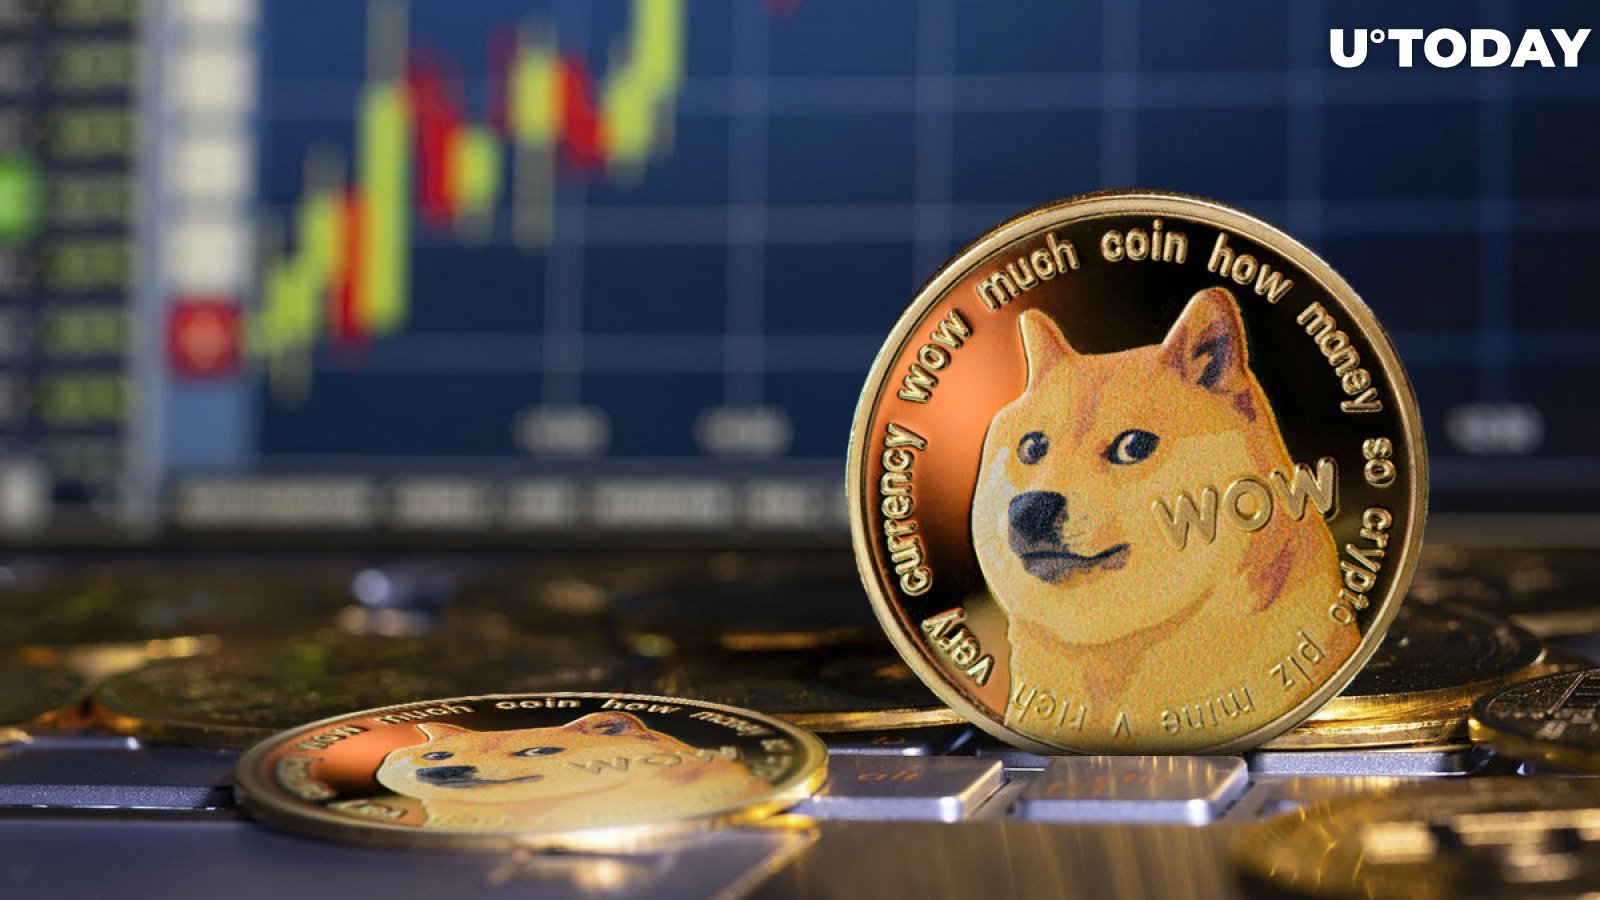 Dogecoin (DOGE) Soars 39% to Erase One Zero, Path to ATH?